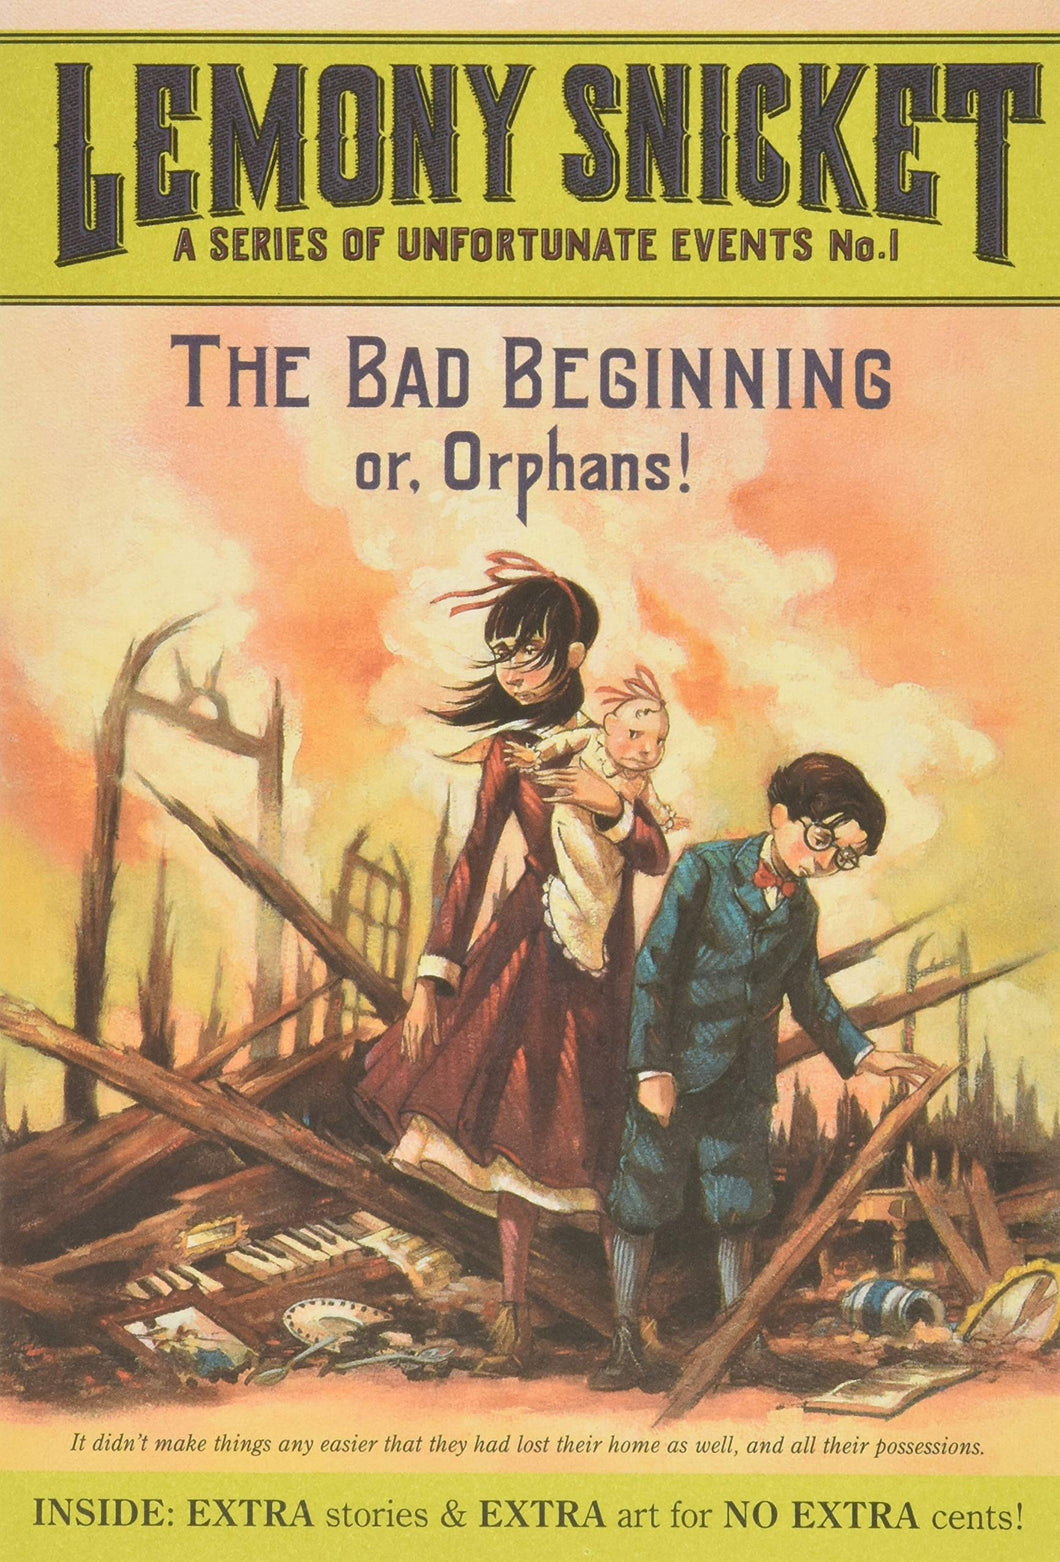 A Series of Unfortunate Events: The Bad Beginning: Or, Orphans!